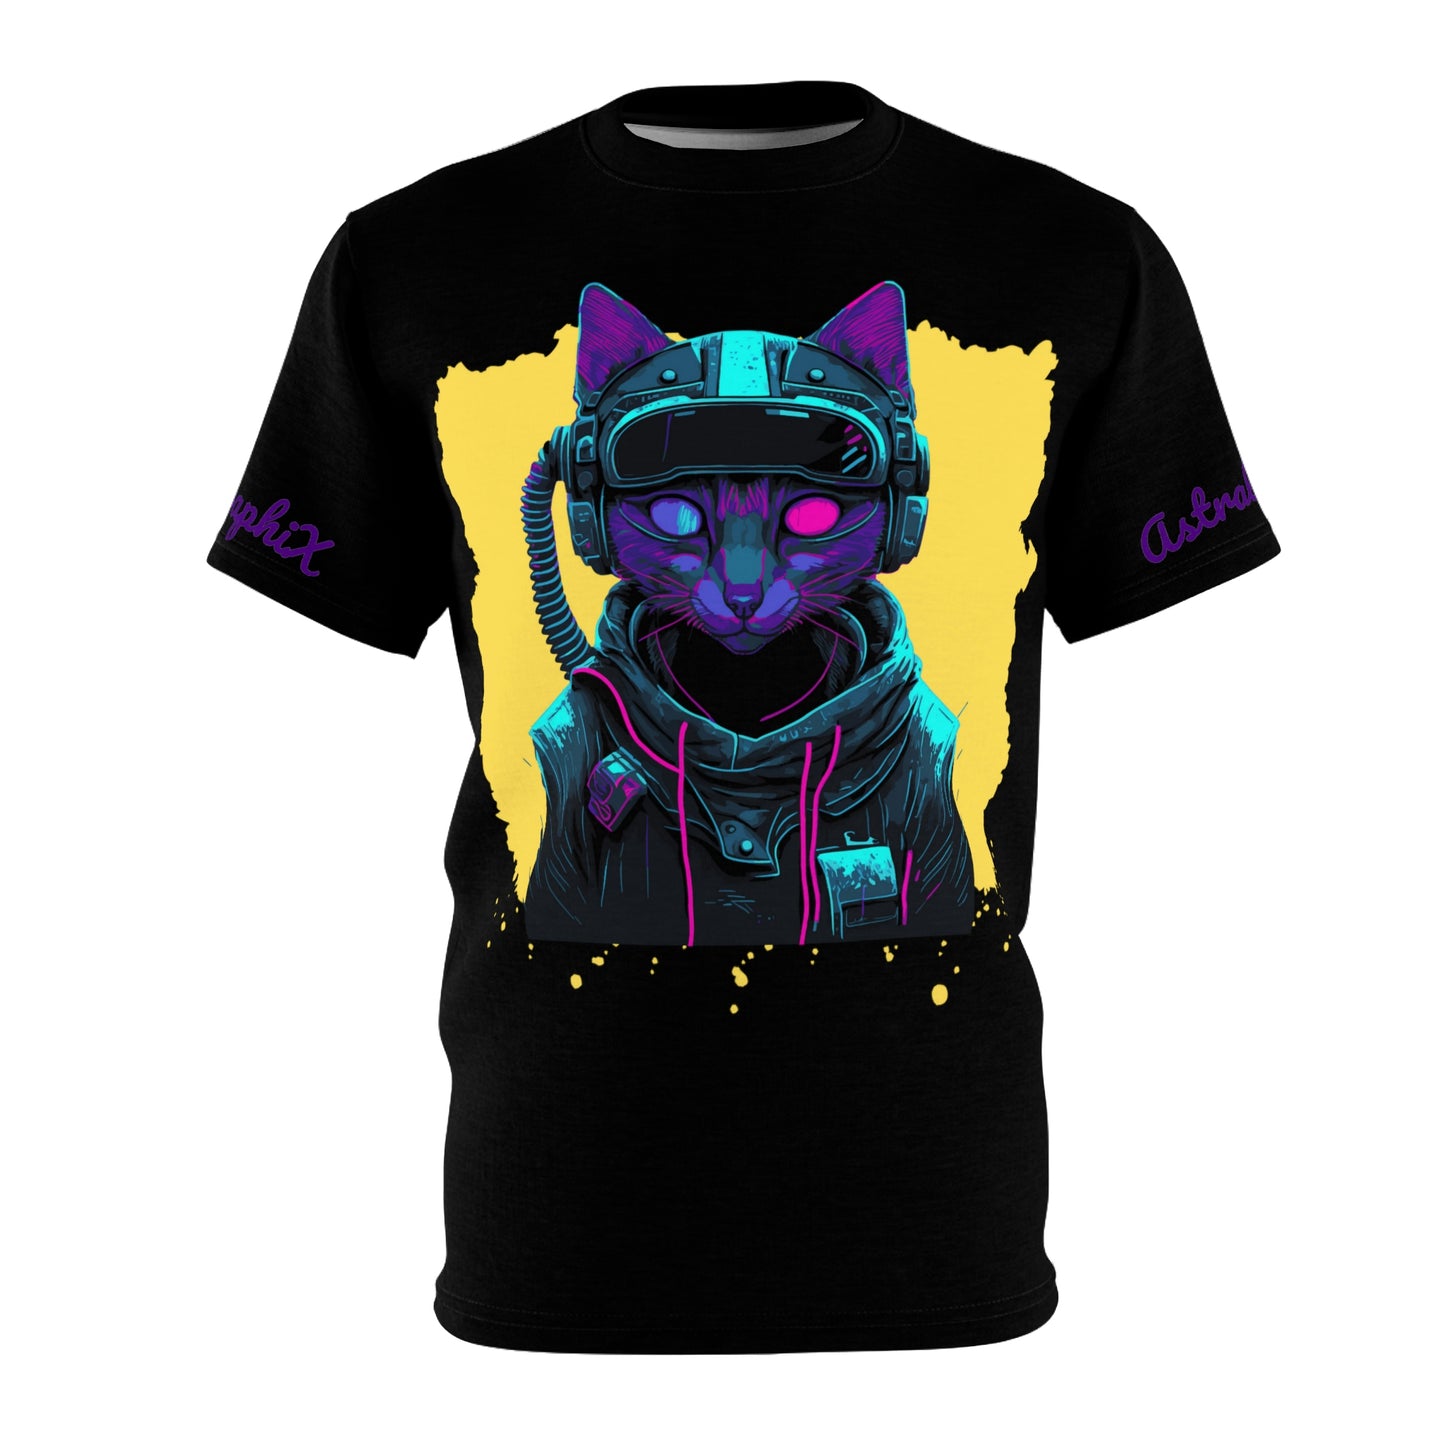 Cyber Punk Collection - Unisex AOP Cut & Sew Tee - Cyber Kitty v1 in Black